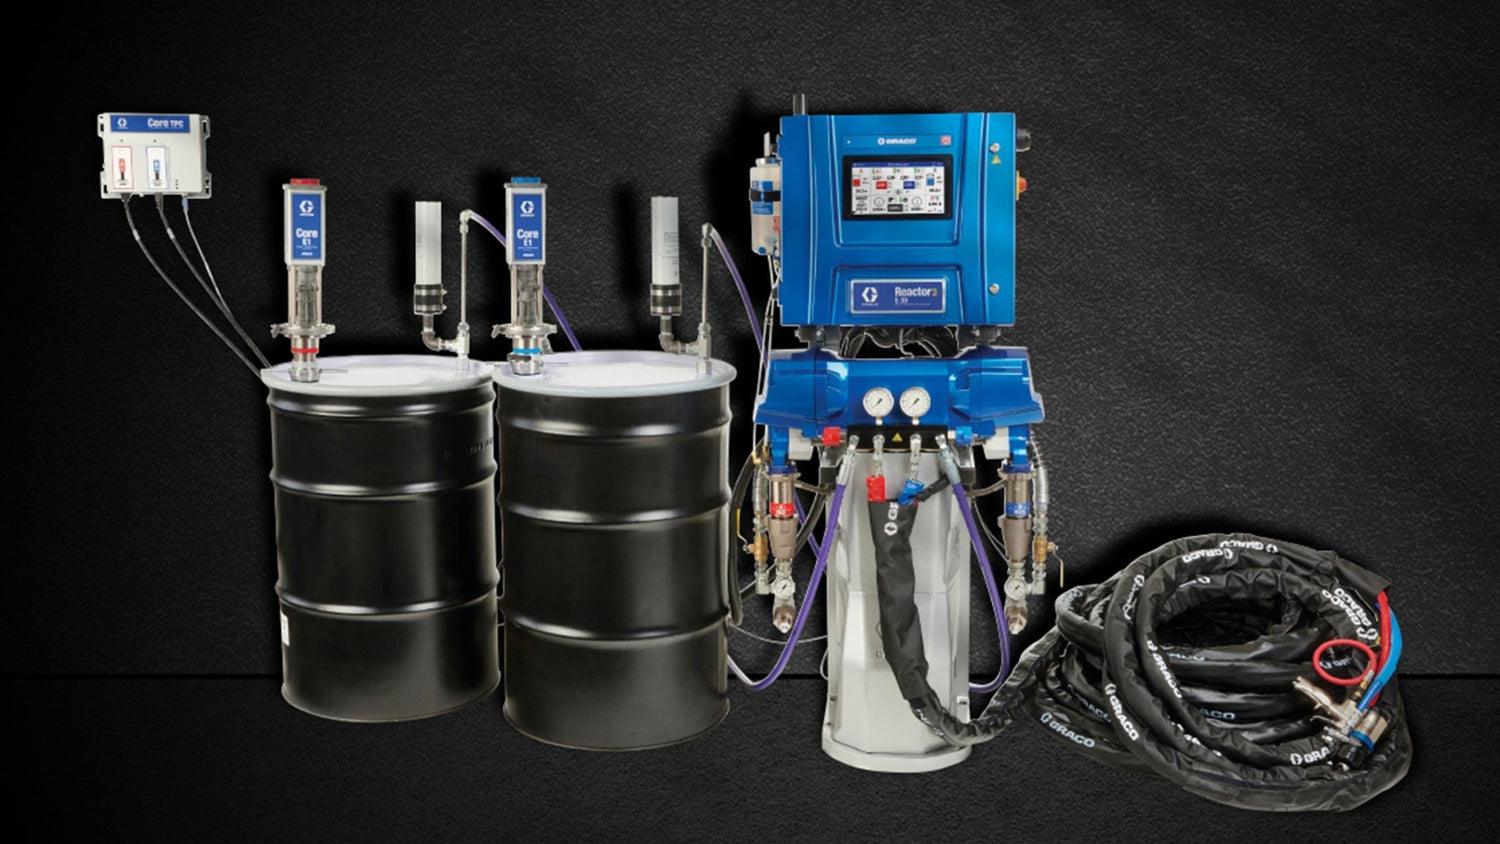 Maximize Your Spray Foam Insulation Efficiency with the Graco Reactor 3 - PURspray